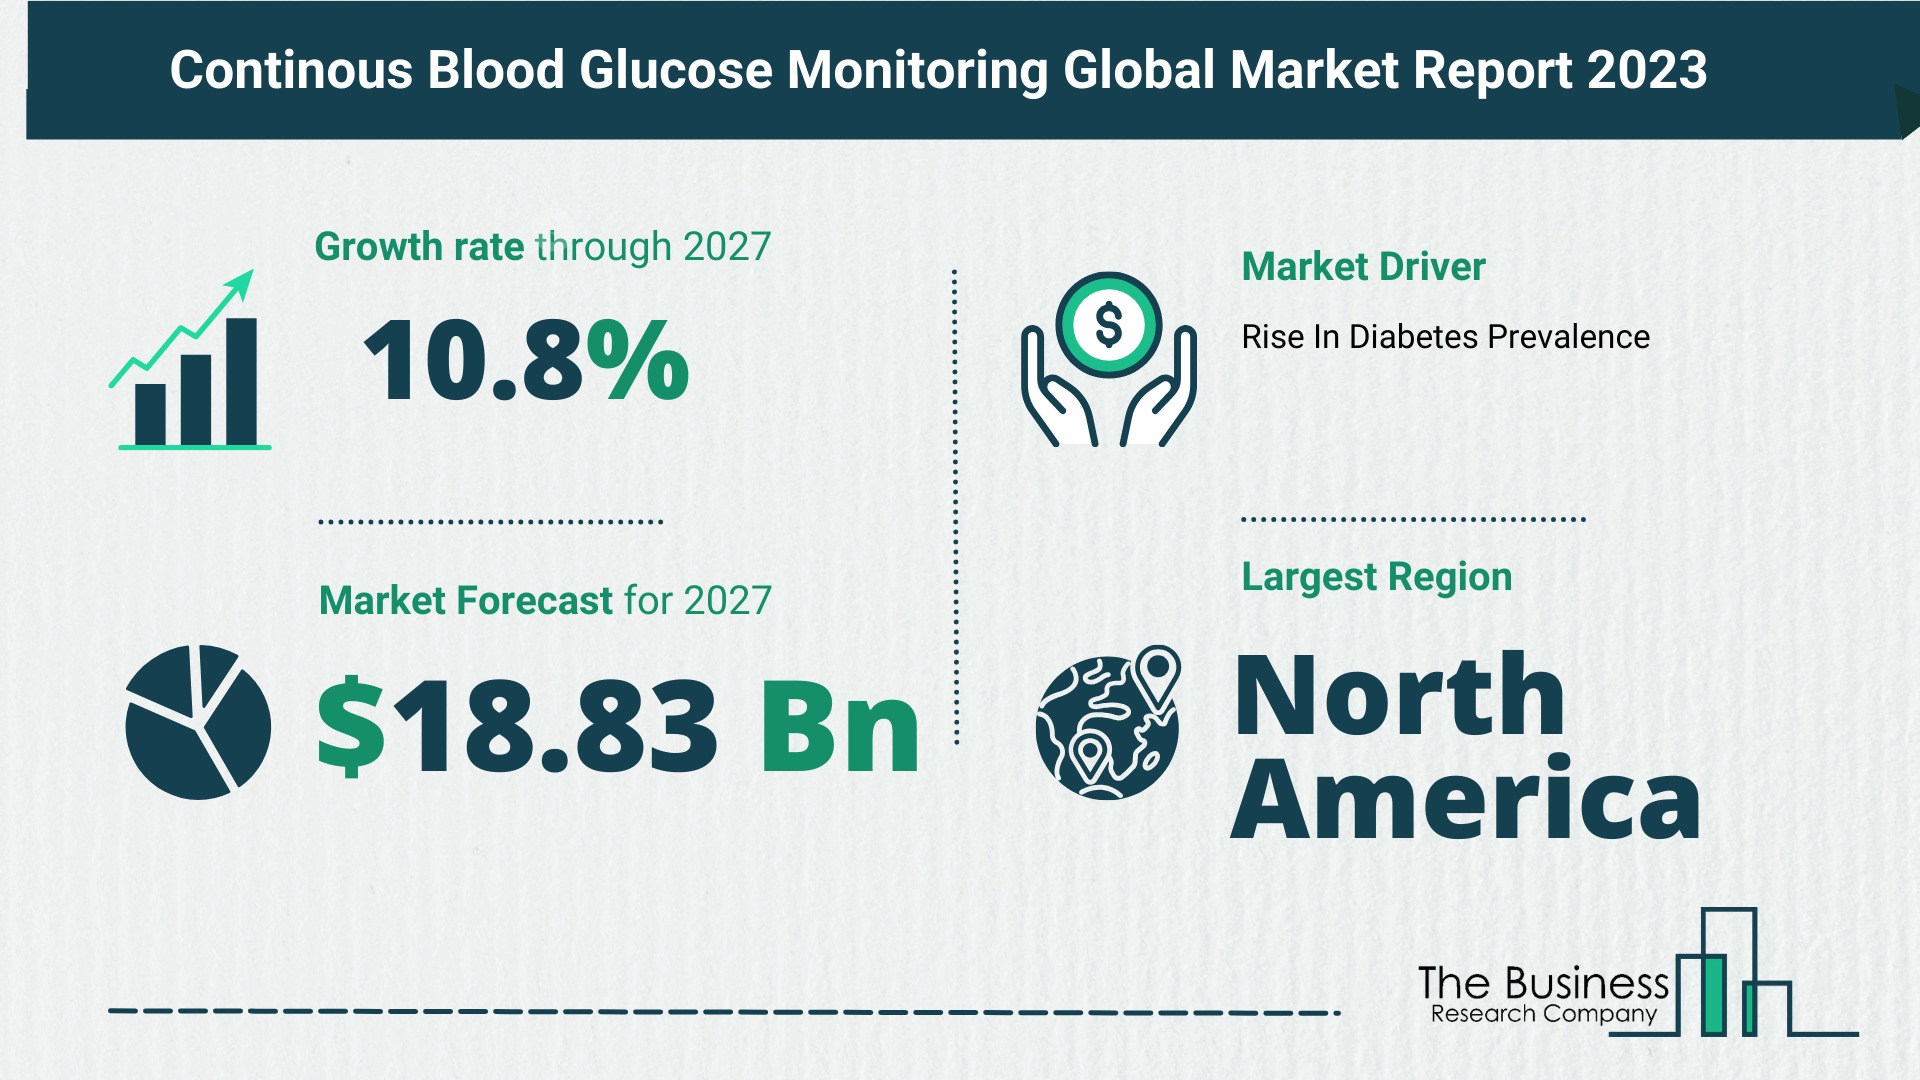 Global Continous Blood Glucose Monitoring Market Analysis: Size, Drivers, Trends, Opportunities And Strategies